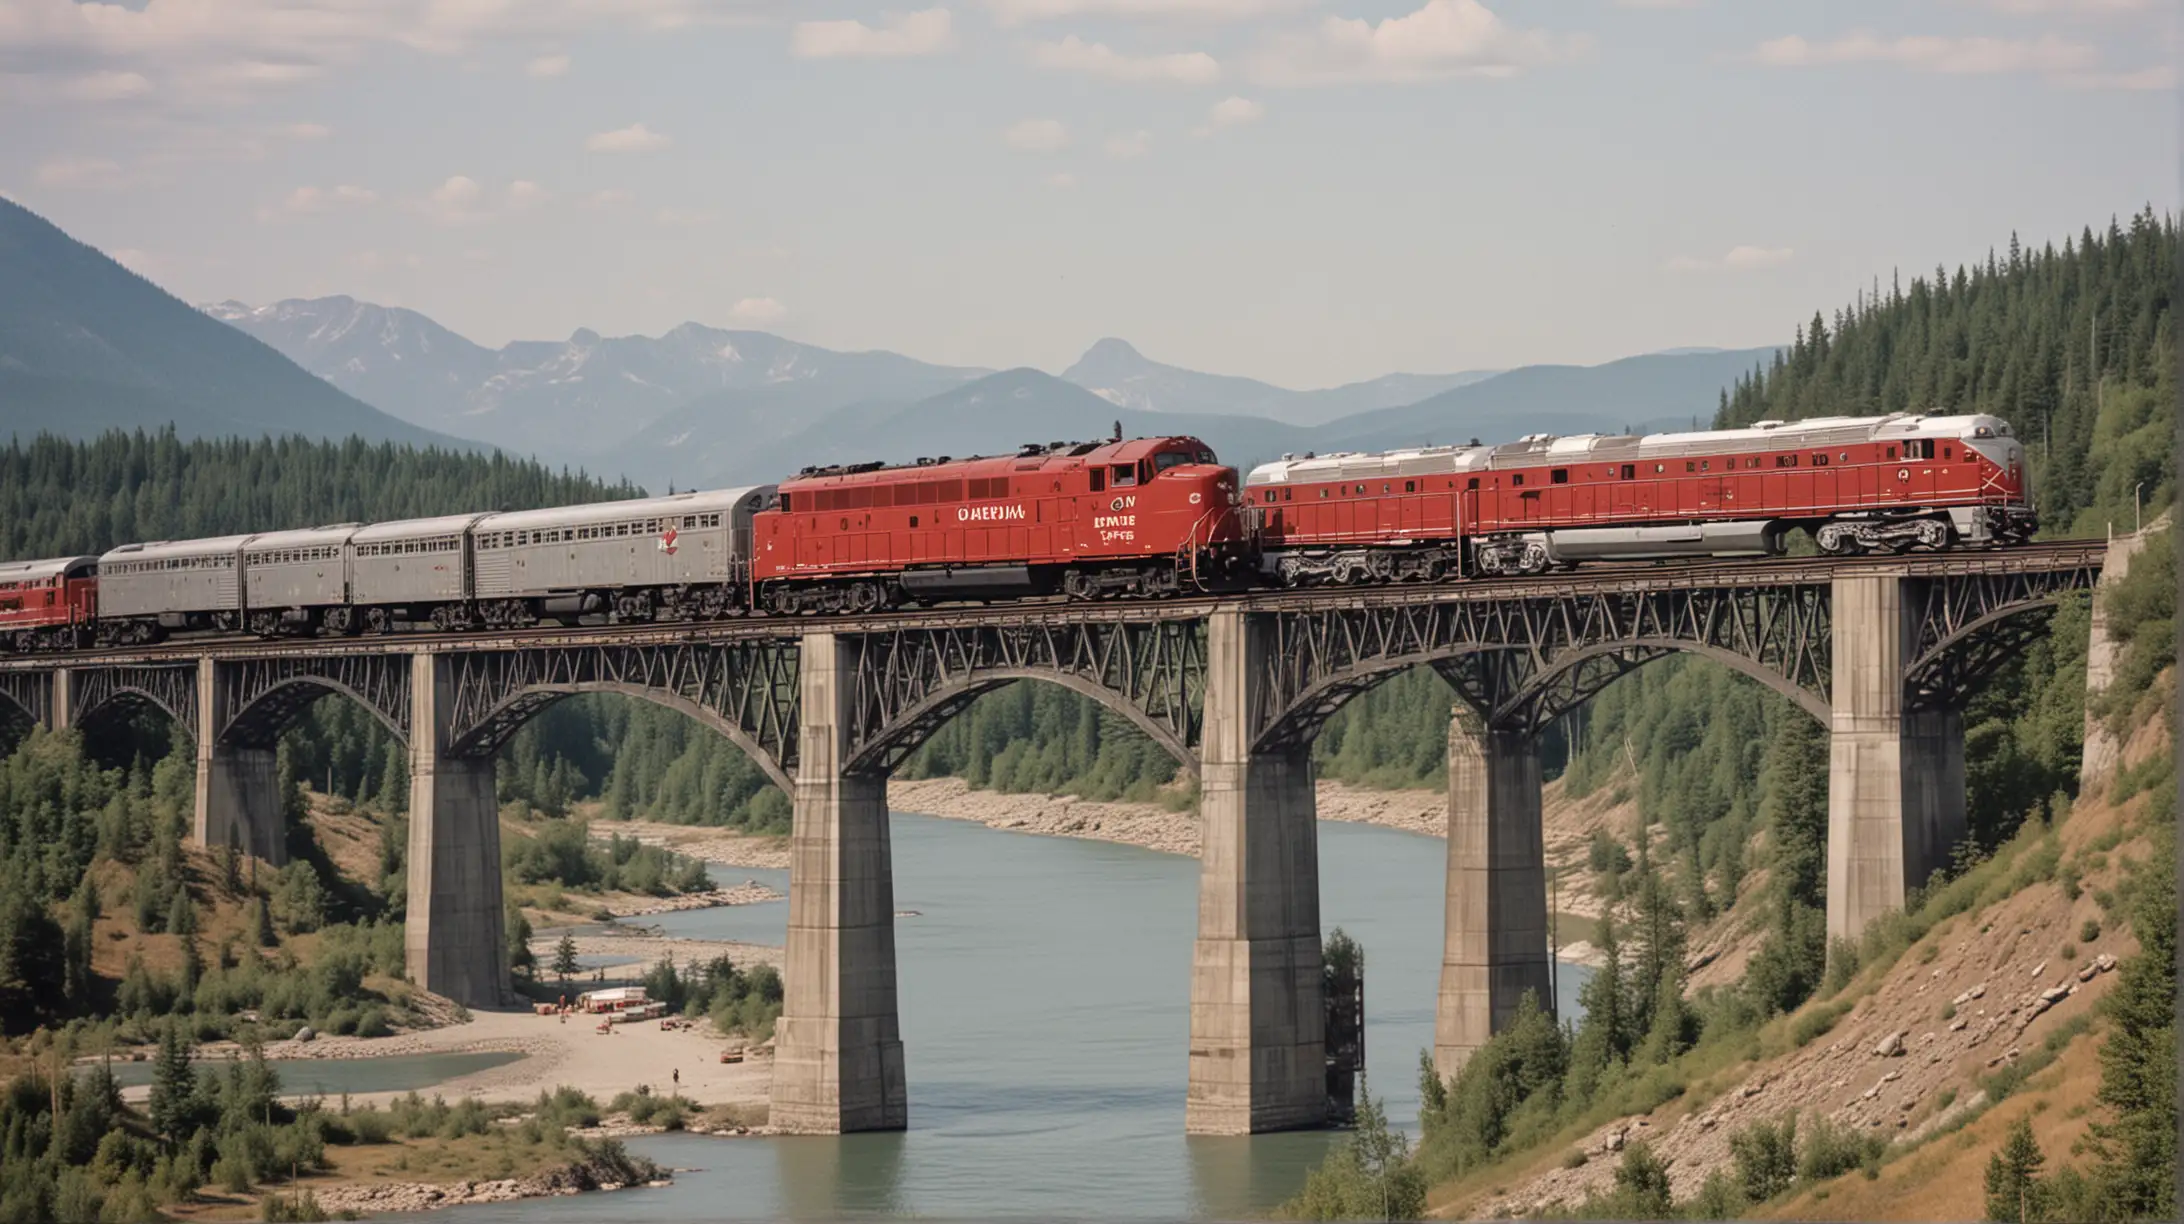 Canadian Pacific Passenger Train Crossing Bridge with Aluminum Cars in 1950s Style